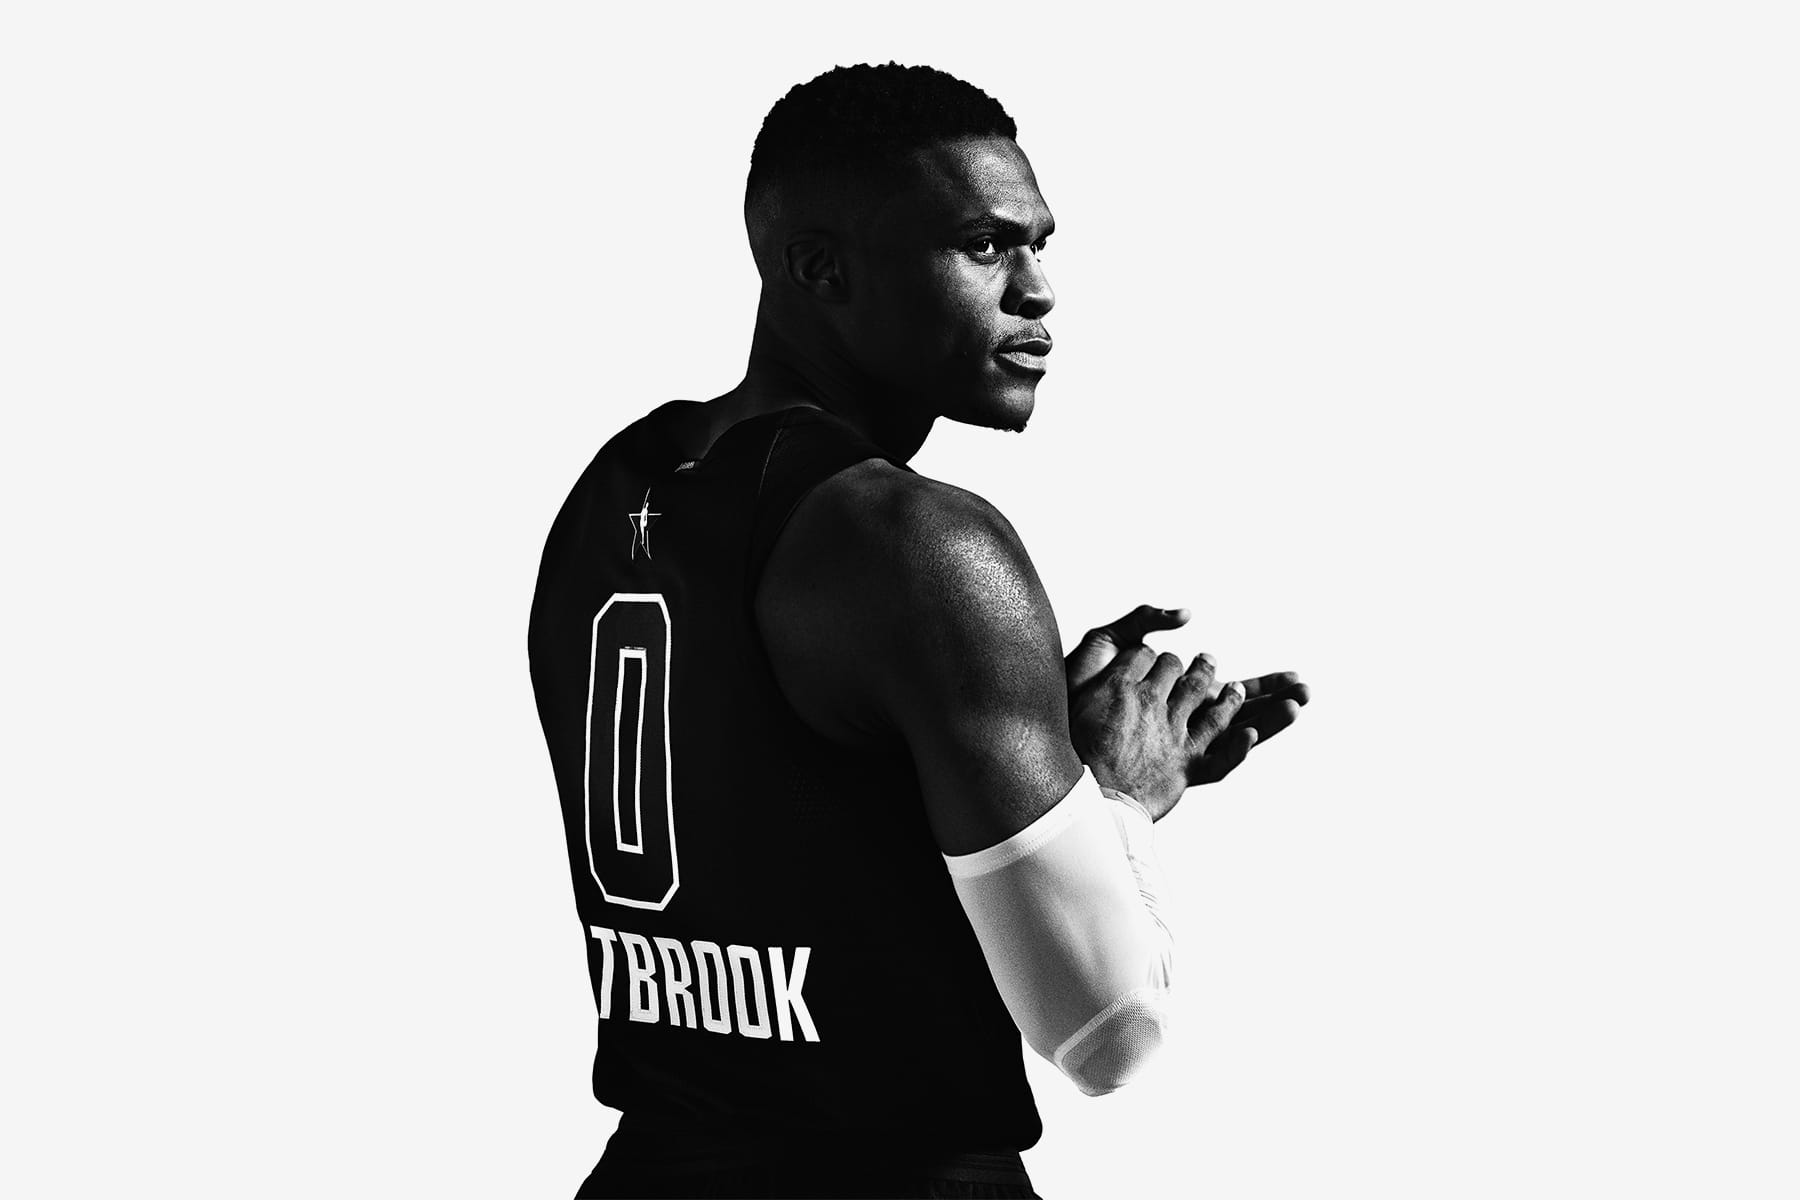 russell westbrook all star jersey 2018